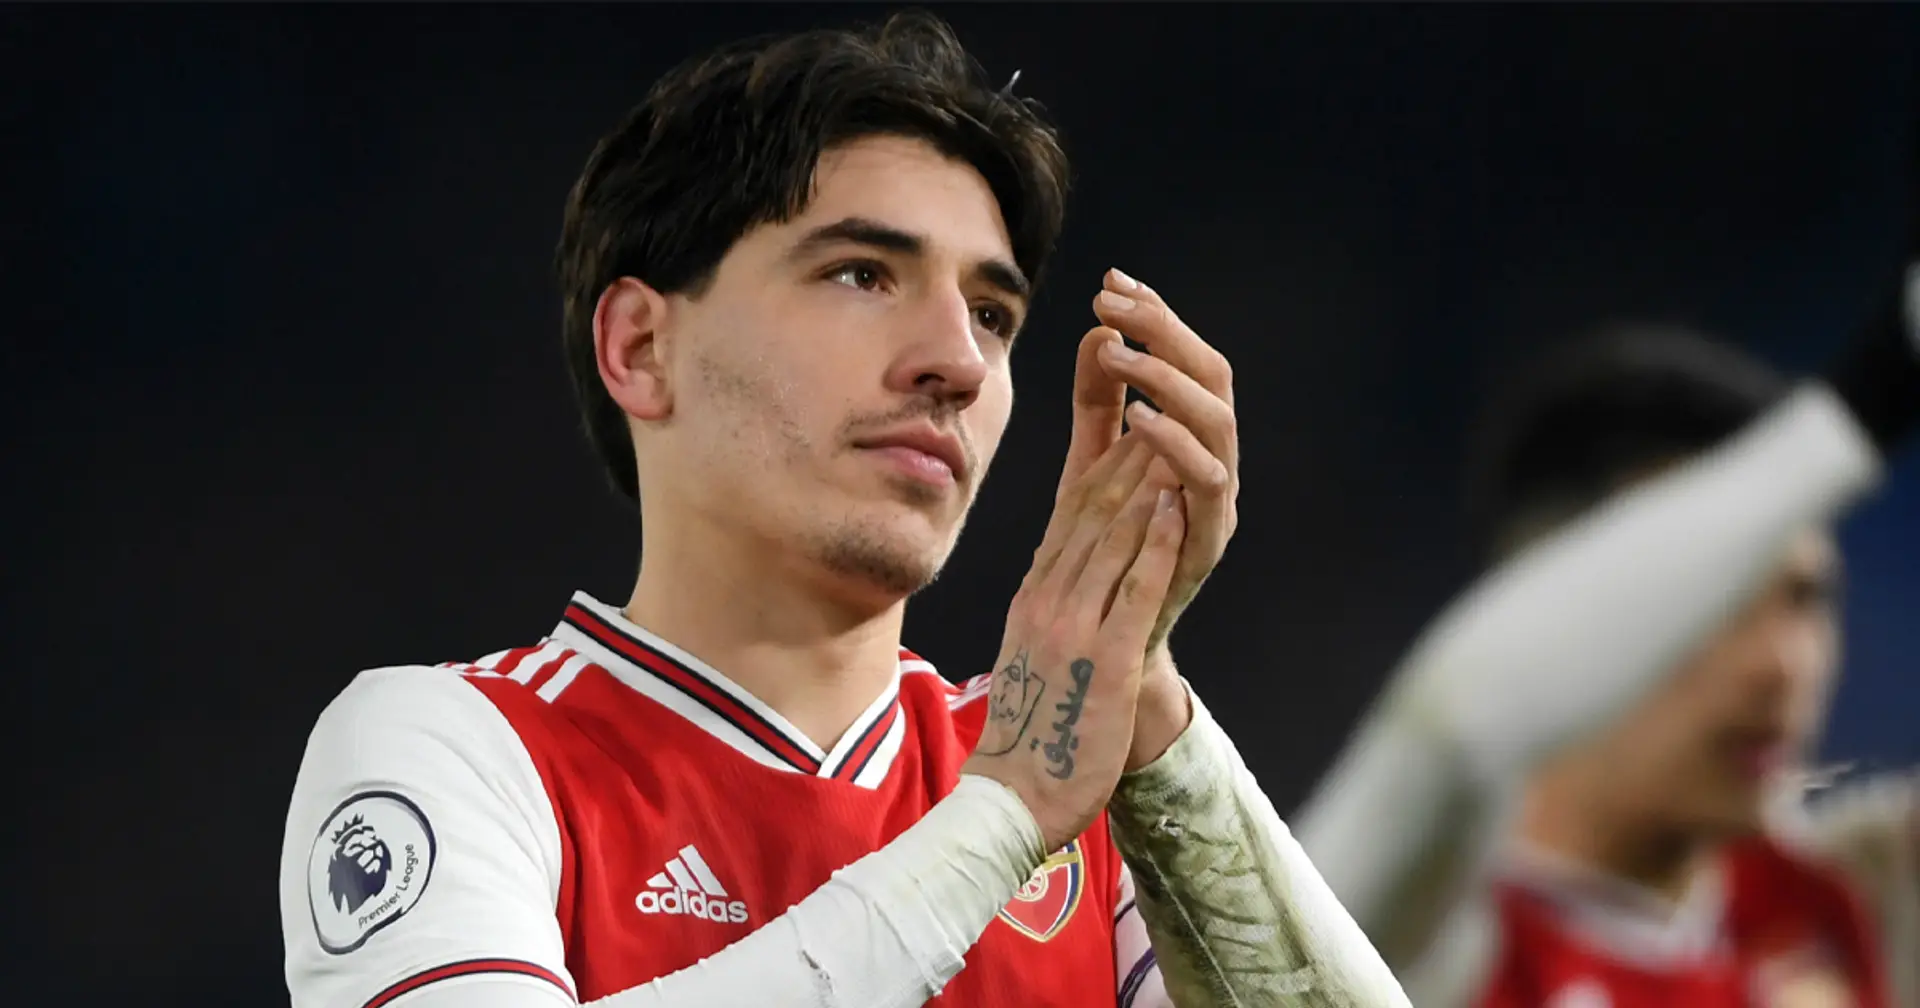 'I’m excited to help push football into having a sustainable future': Bellerin becomes second-largest shareholder in world's first 100% vegan football club